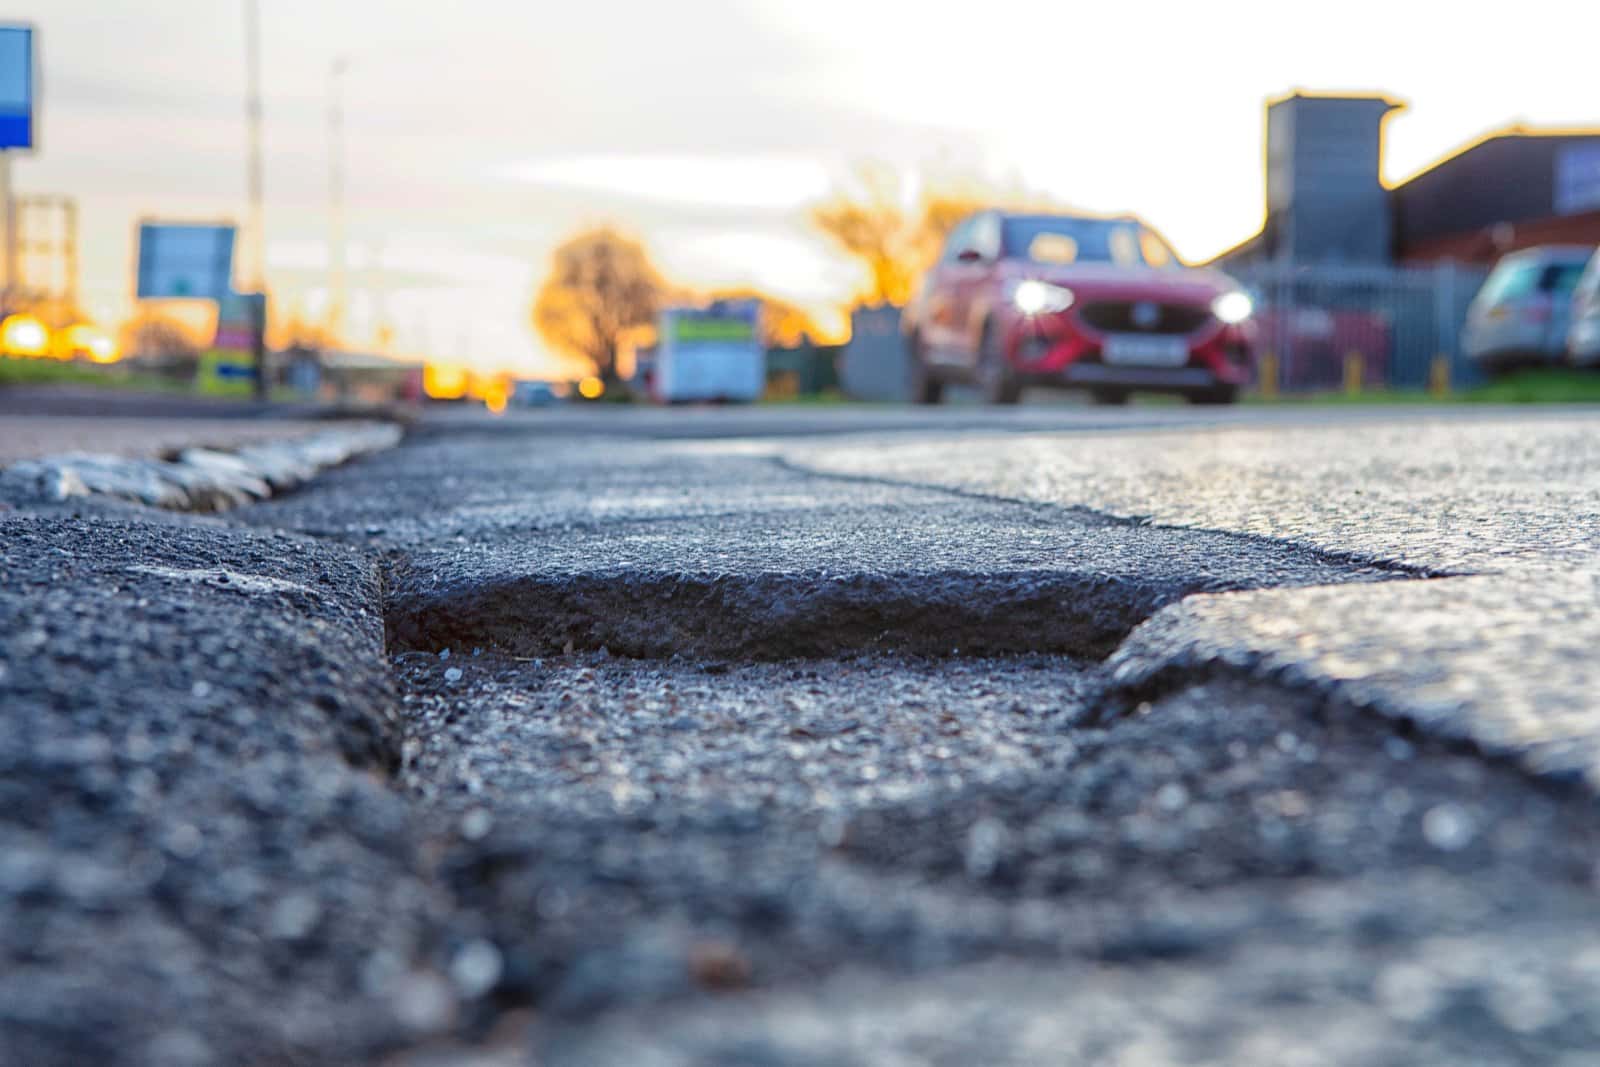 Image Credit: Shutterstock / David Michael Bellis <p><span>Driving on Pennsylvania’s pothole-filled roads feels like a journey through the state’s long history of ignoring infrastructure needs.</span></p>